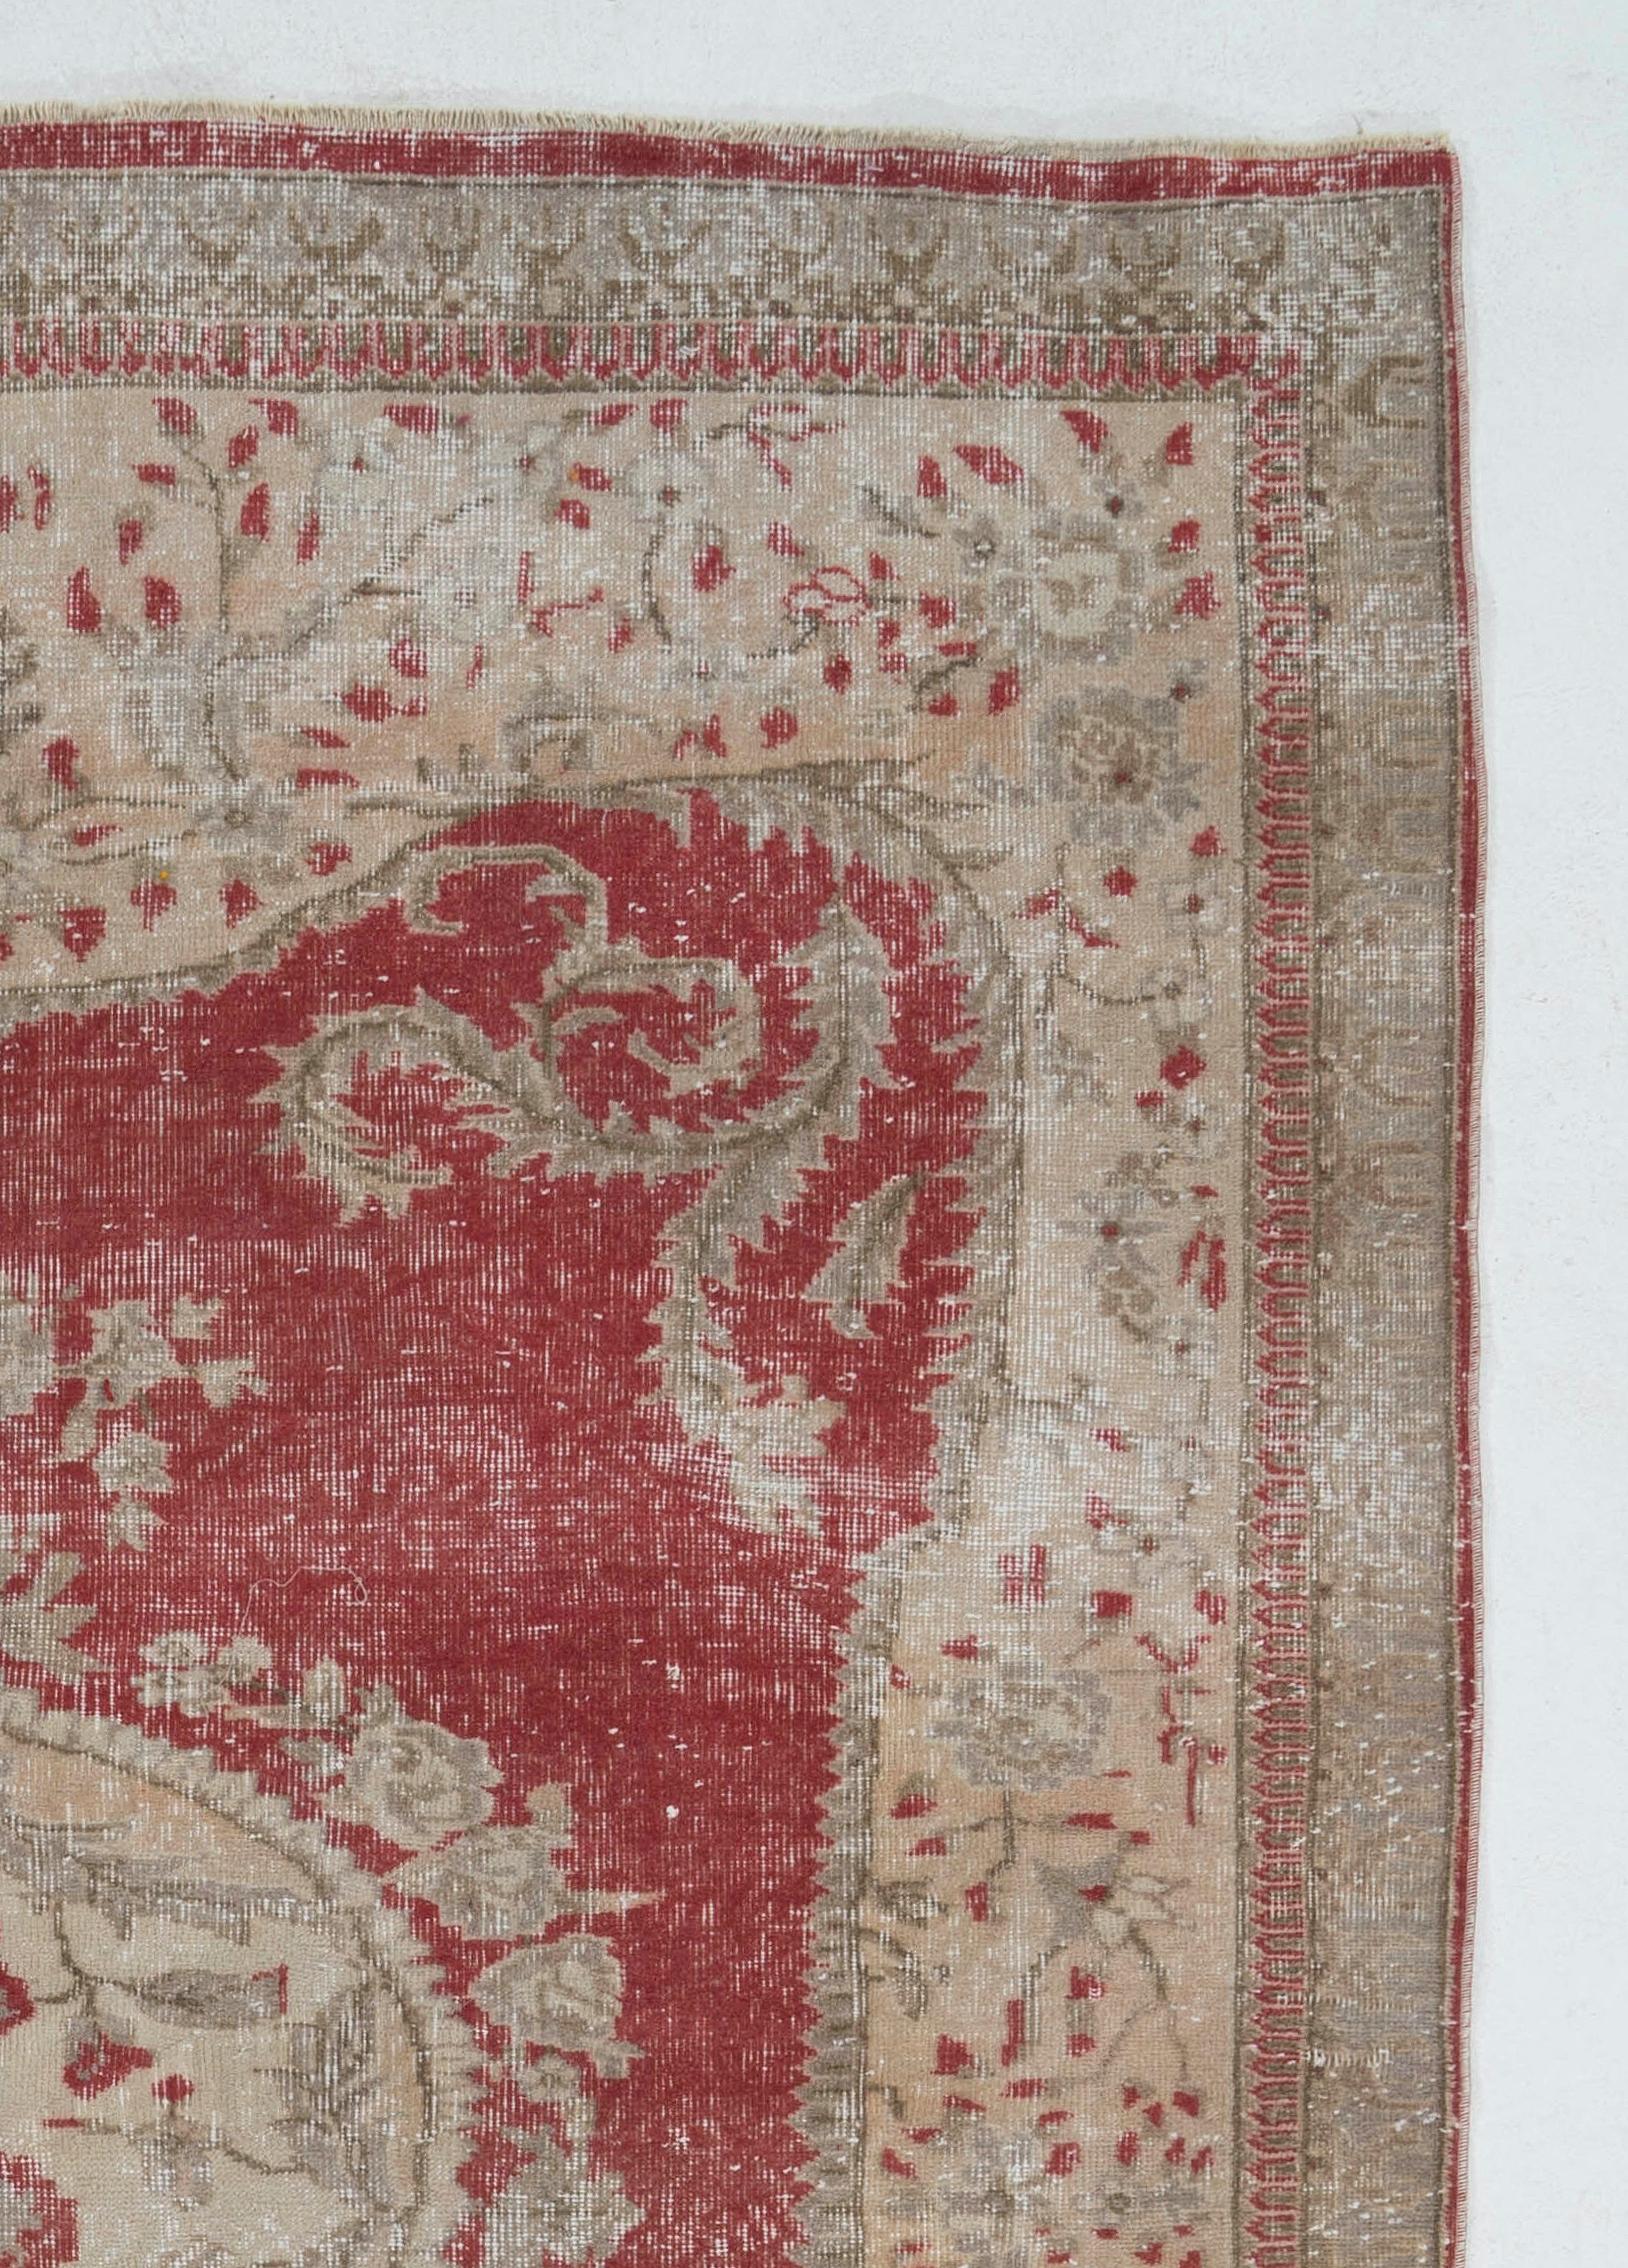 Hand-Knotted 6.5x9.5 Ft Vintage Aubusson Inspired Turkish Rug in Red, Beige & Taupe Colors For Sale